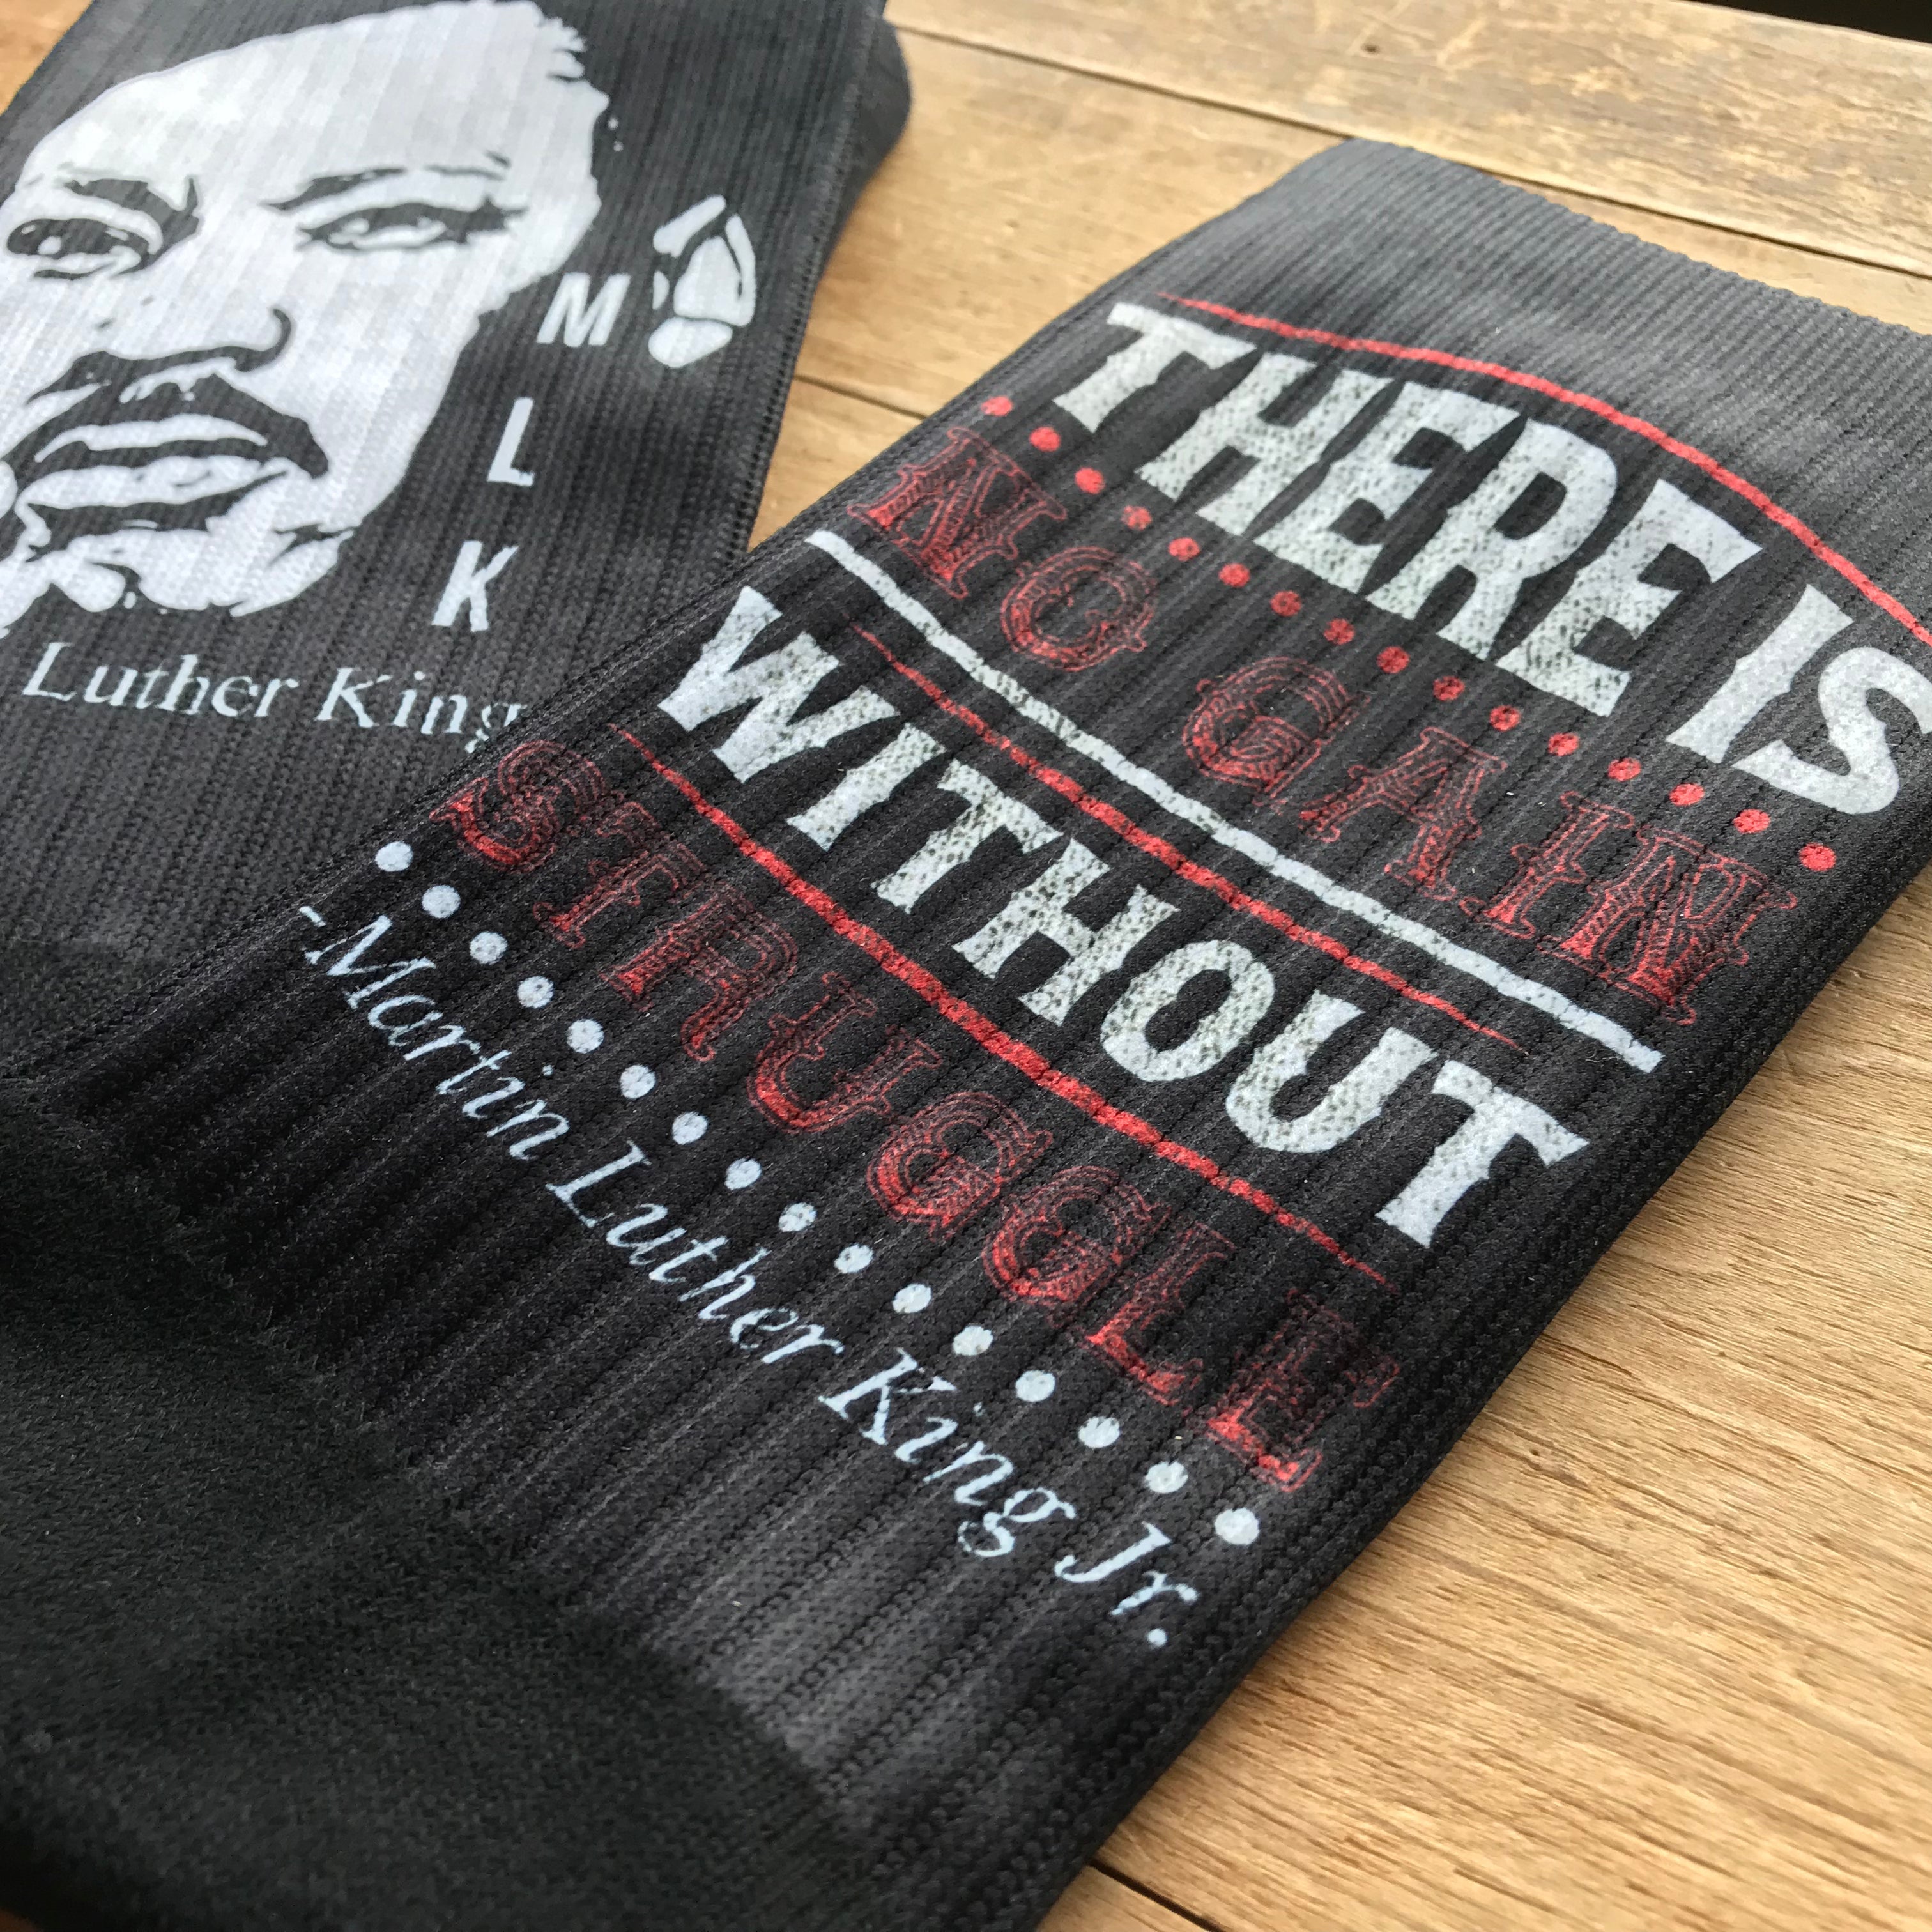 Martin Luther King Jr. His & Hers Socks